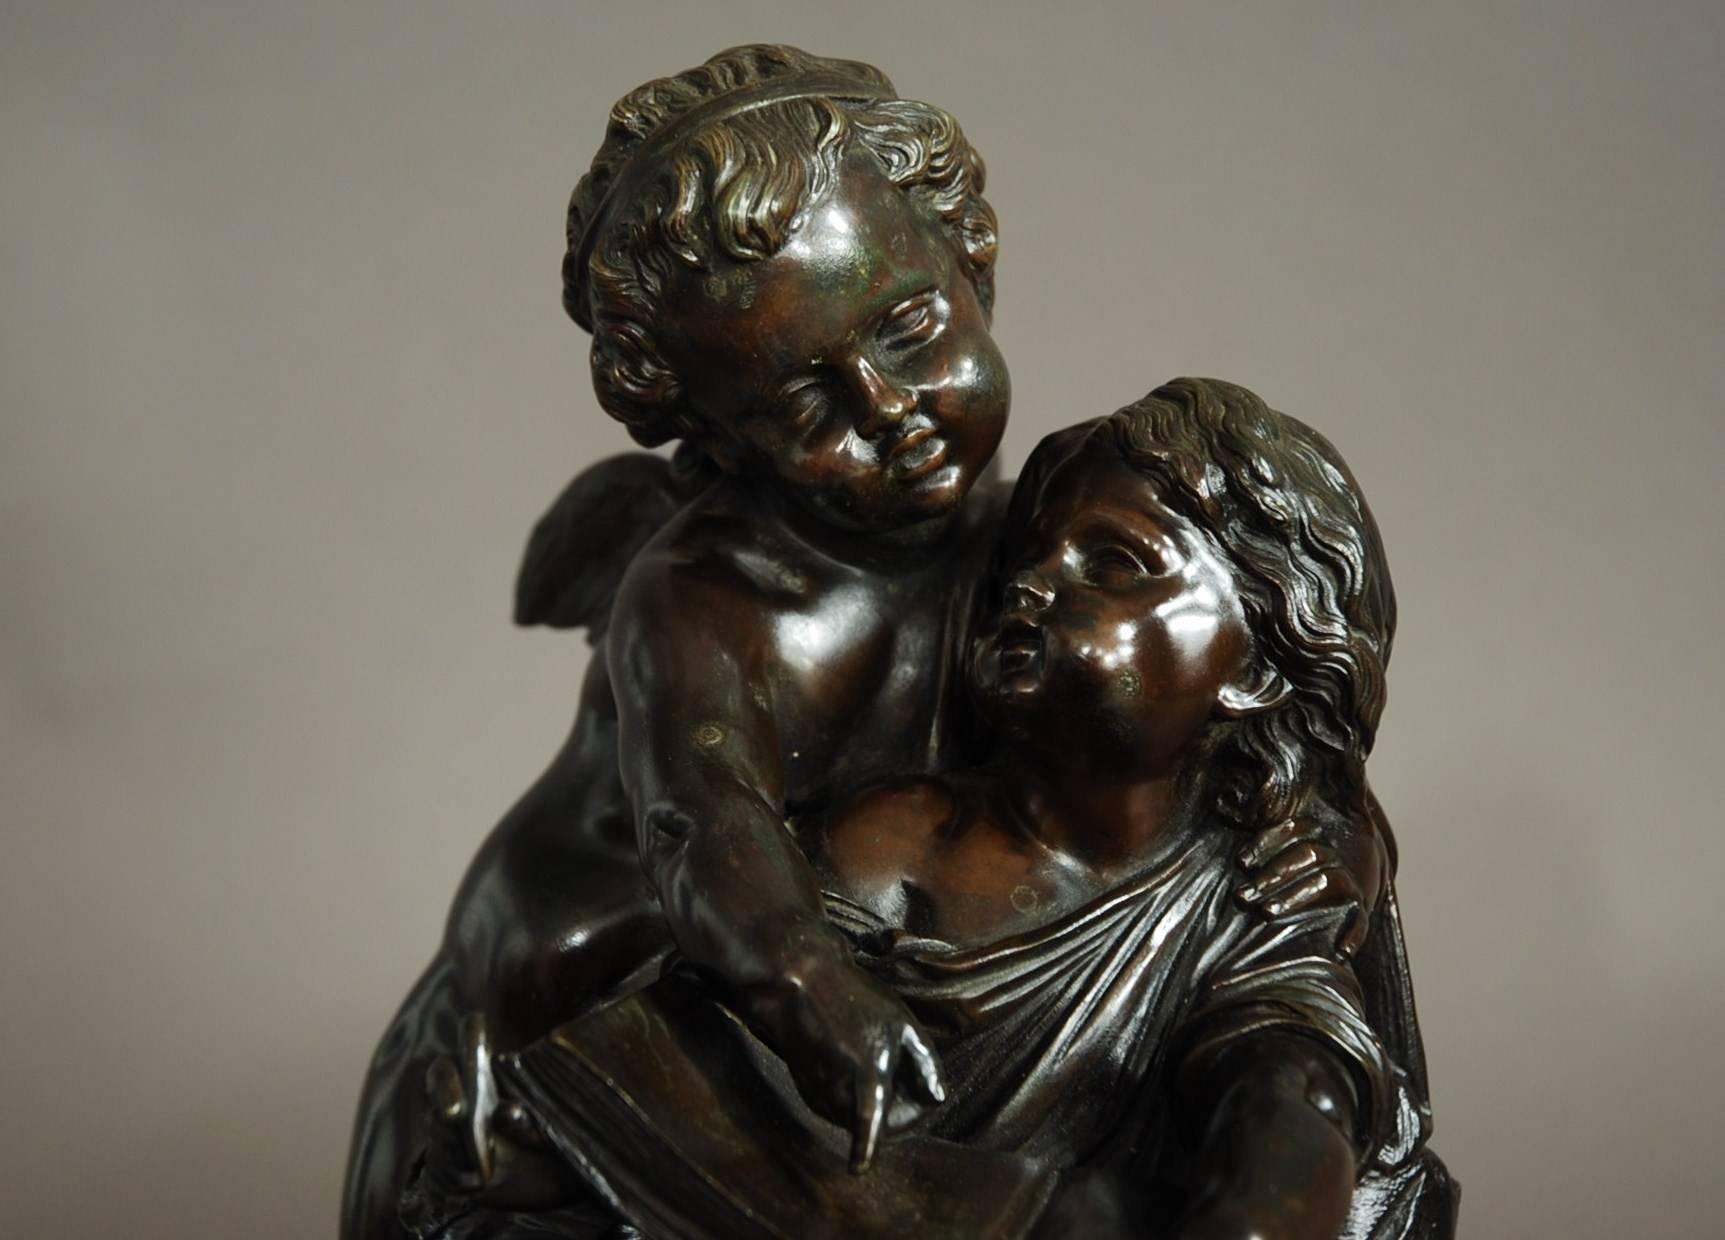 A French mid-19th century bronze of a putto (or cherub) standing next to a seated young girl. 

They are looking at or writing in a book, possibly symbolic of education and learning. 

They are depicted on a bronze naturalistic oval base with